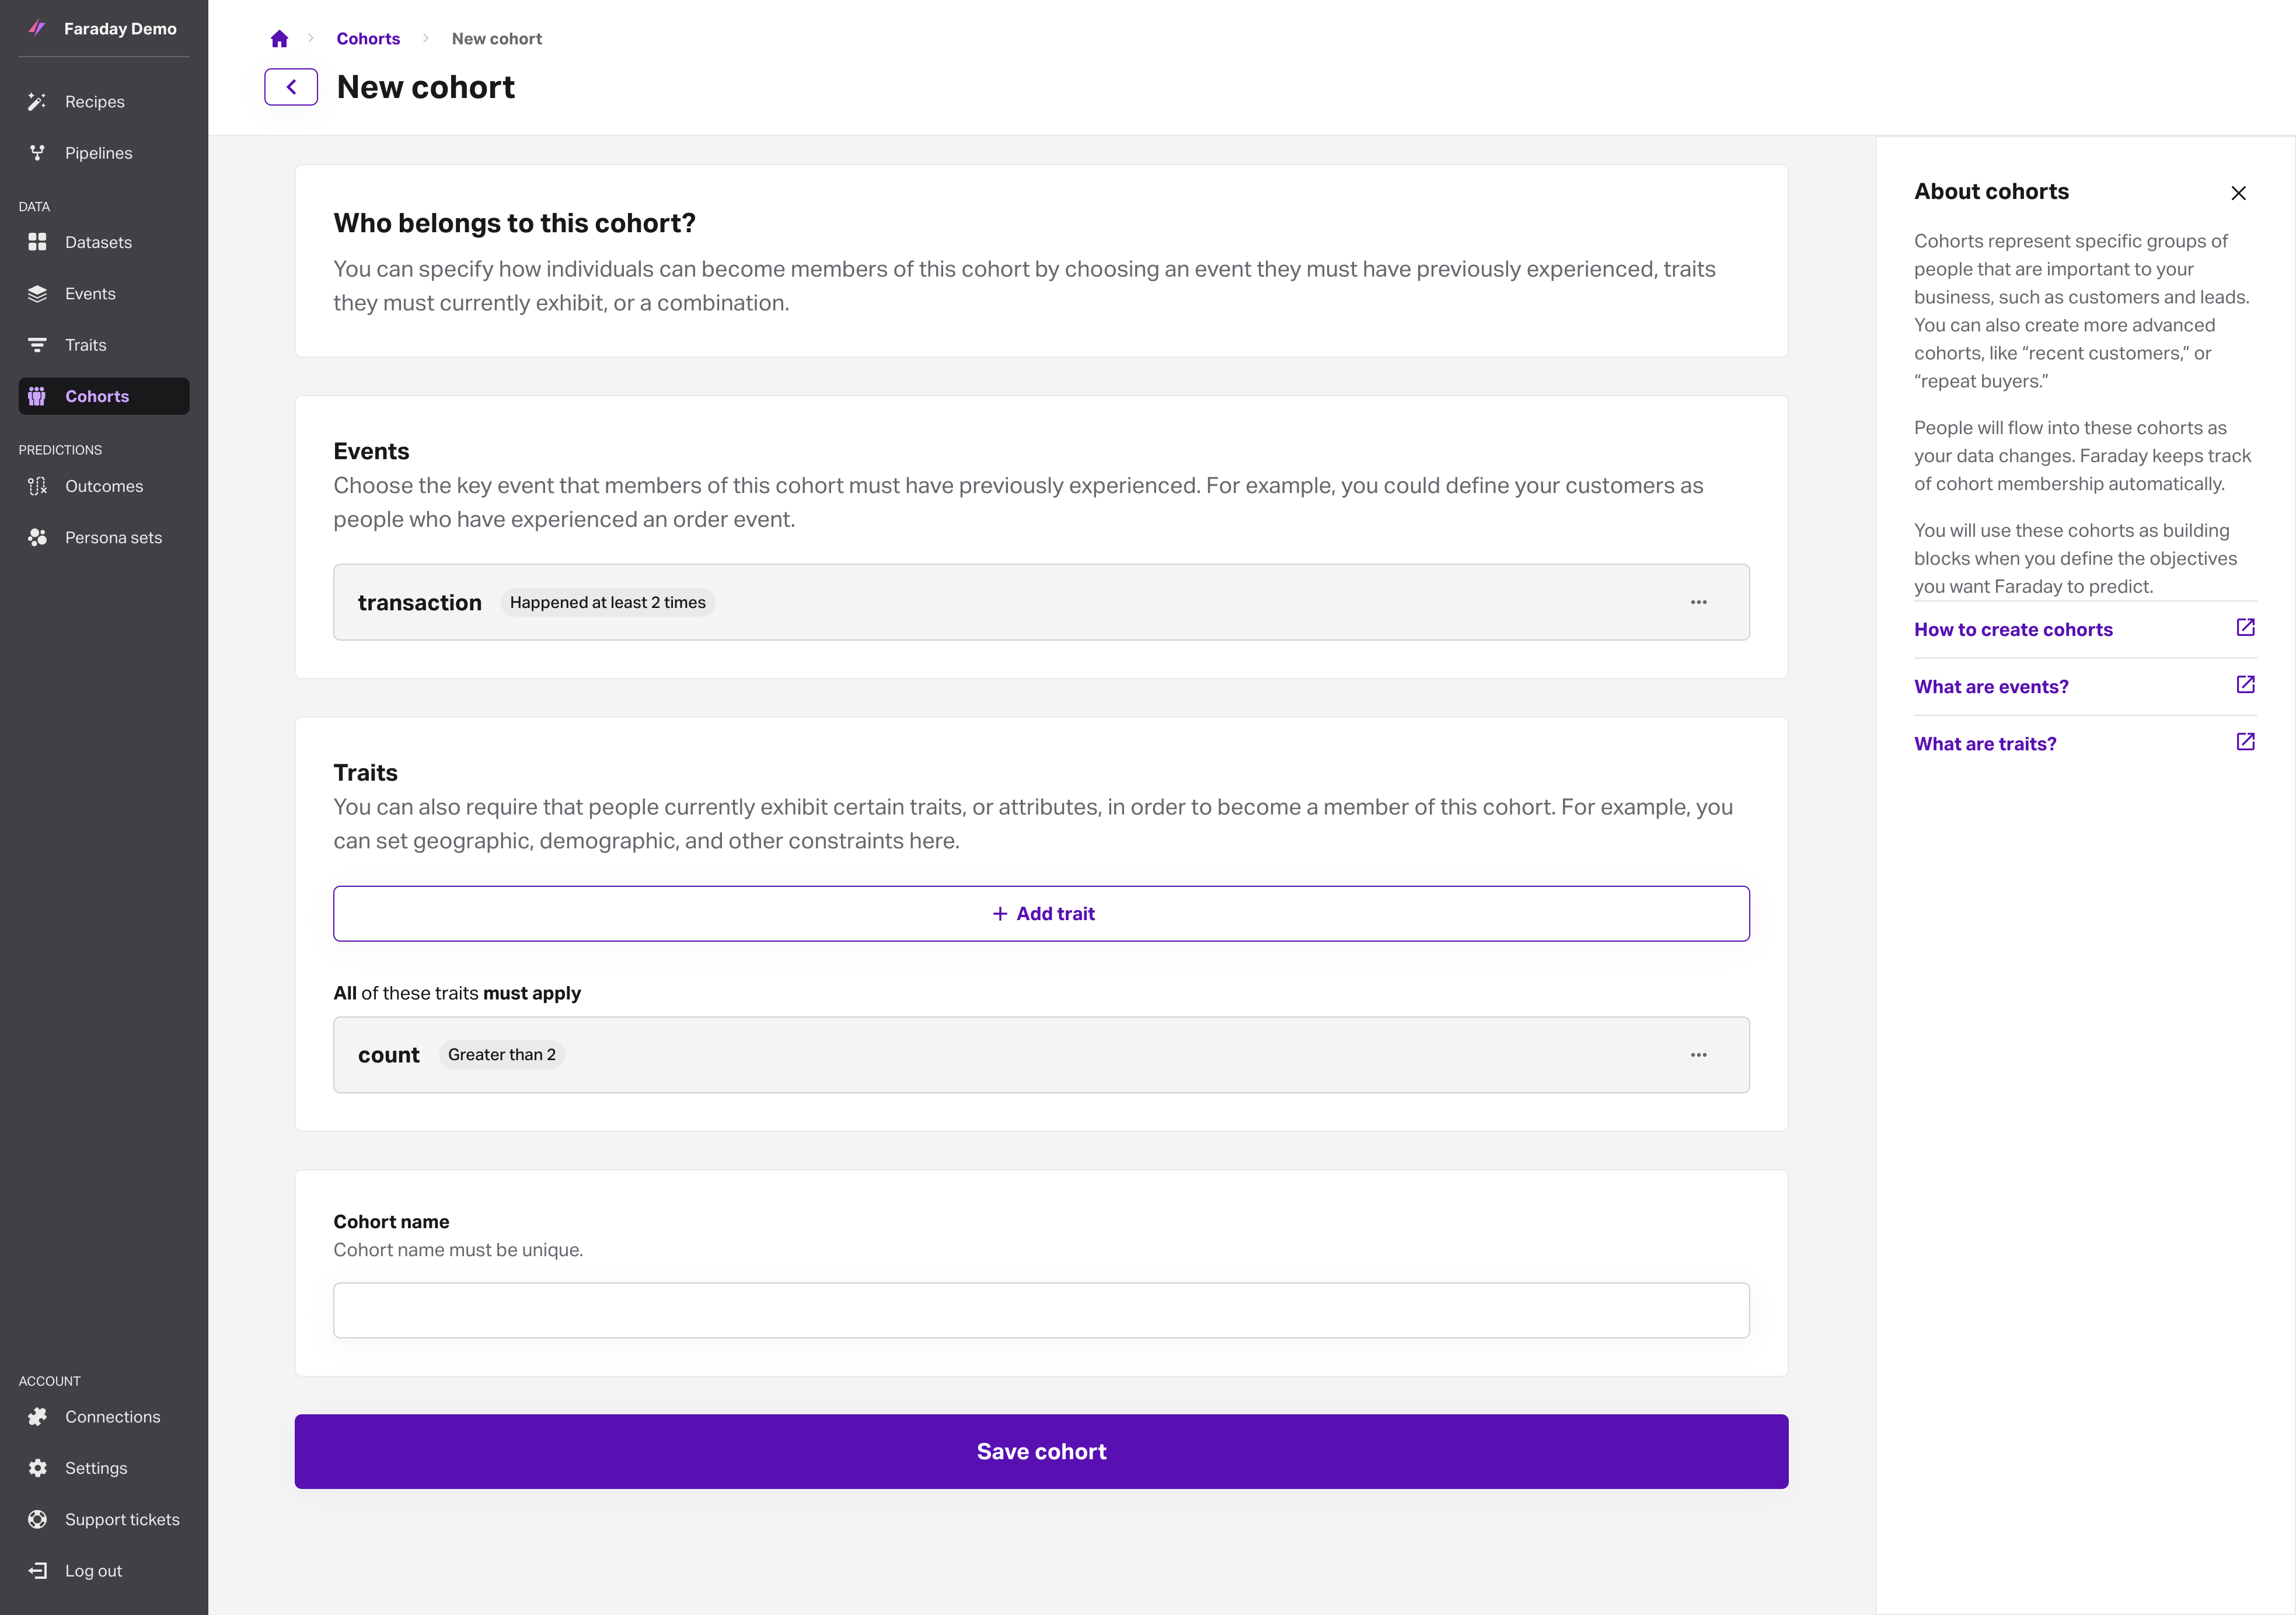 Screenshot of the new cohort form filled out